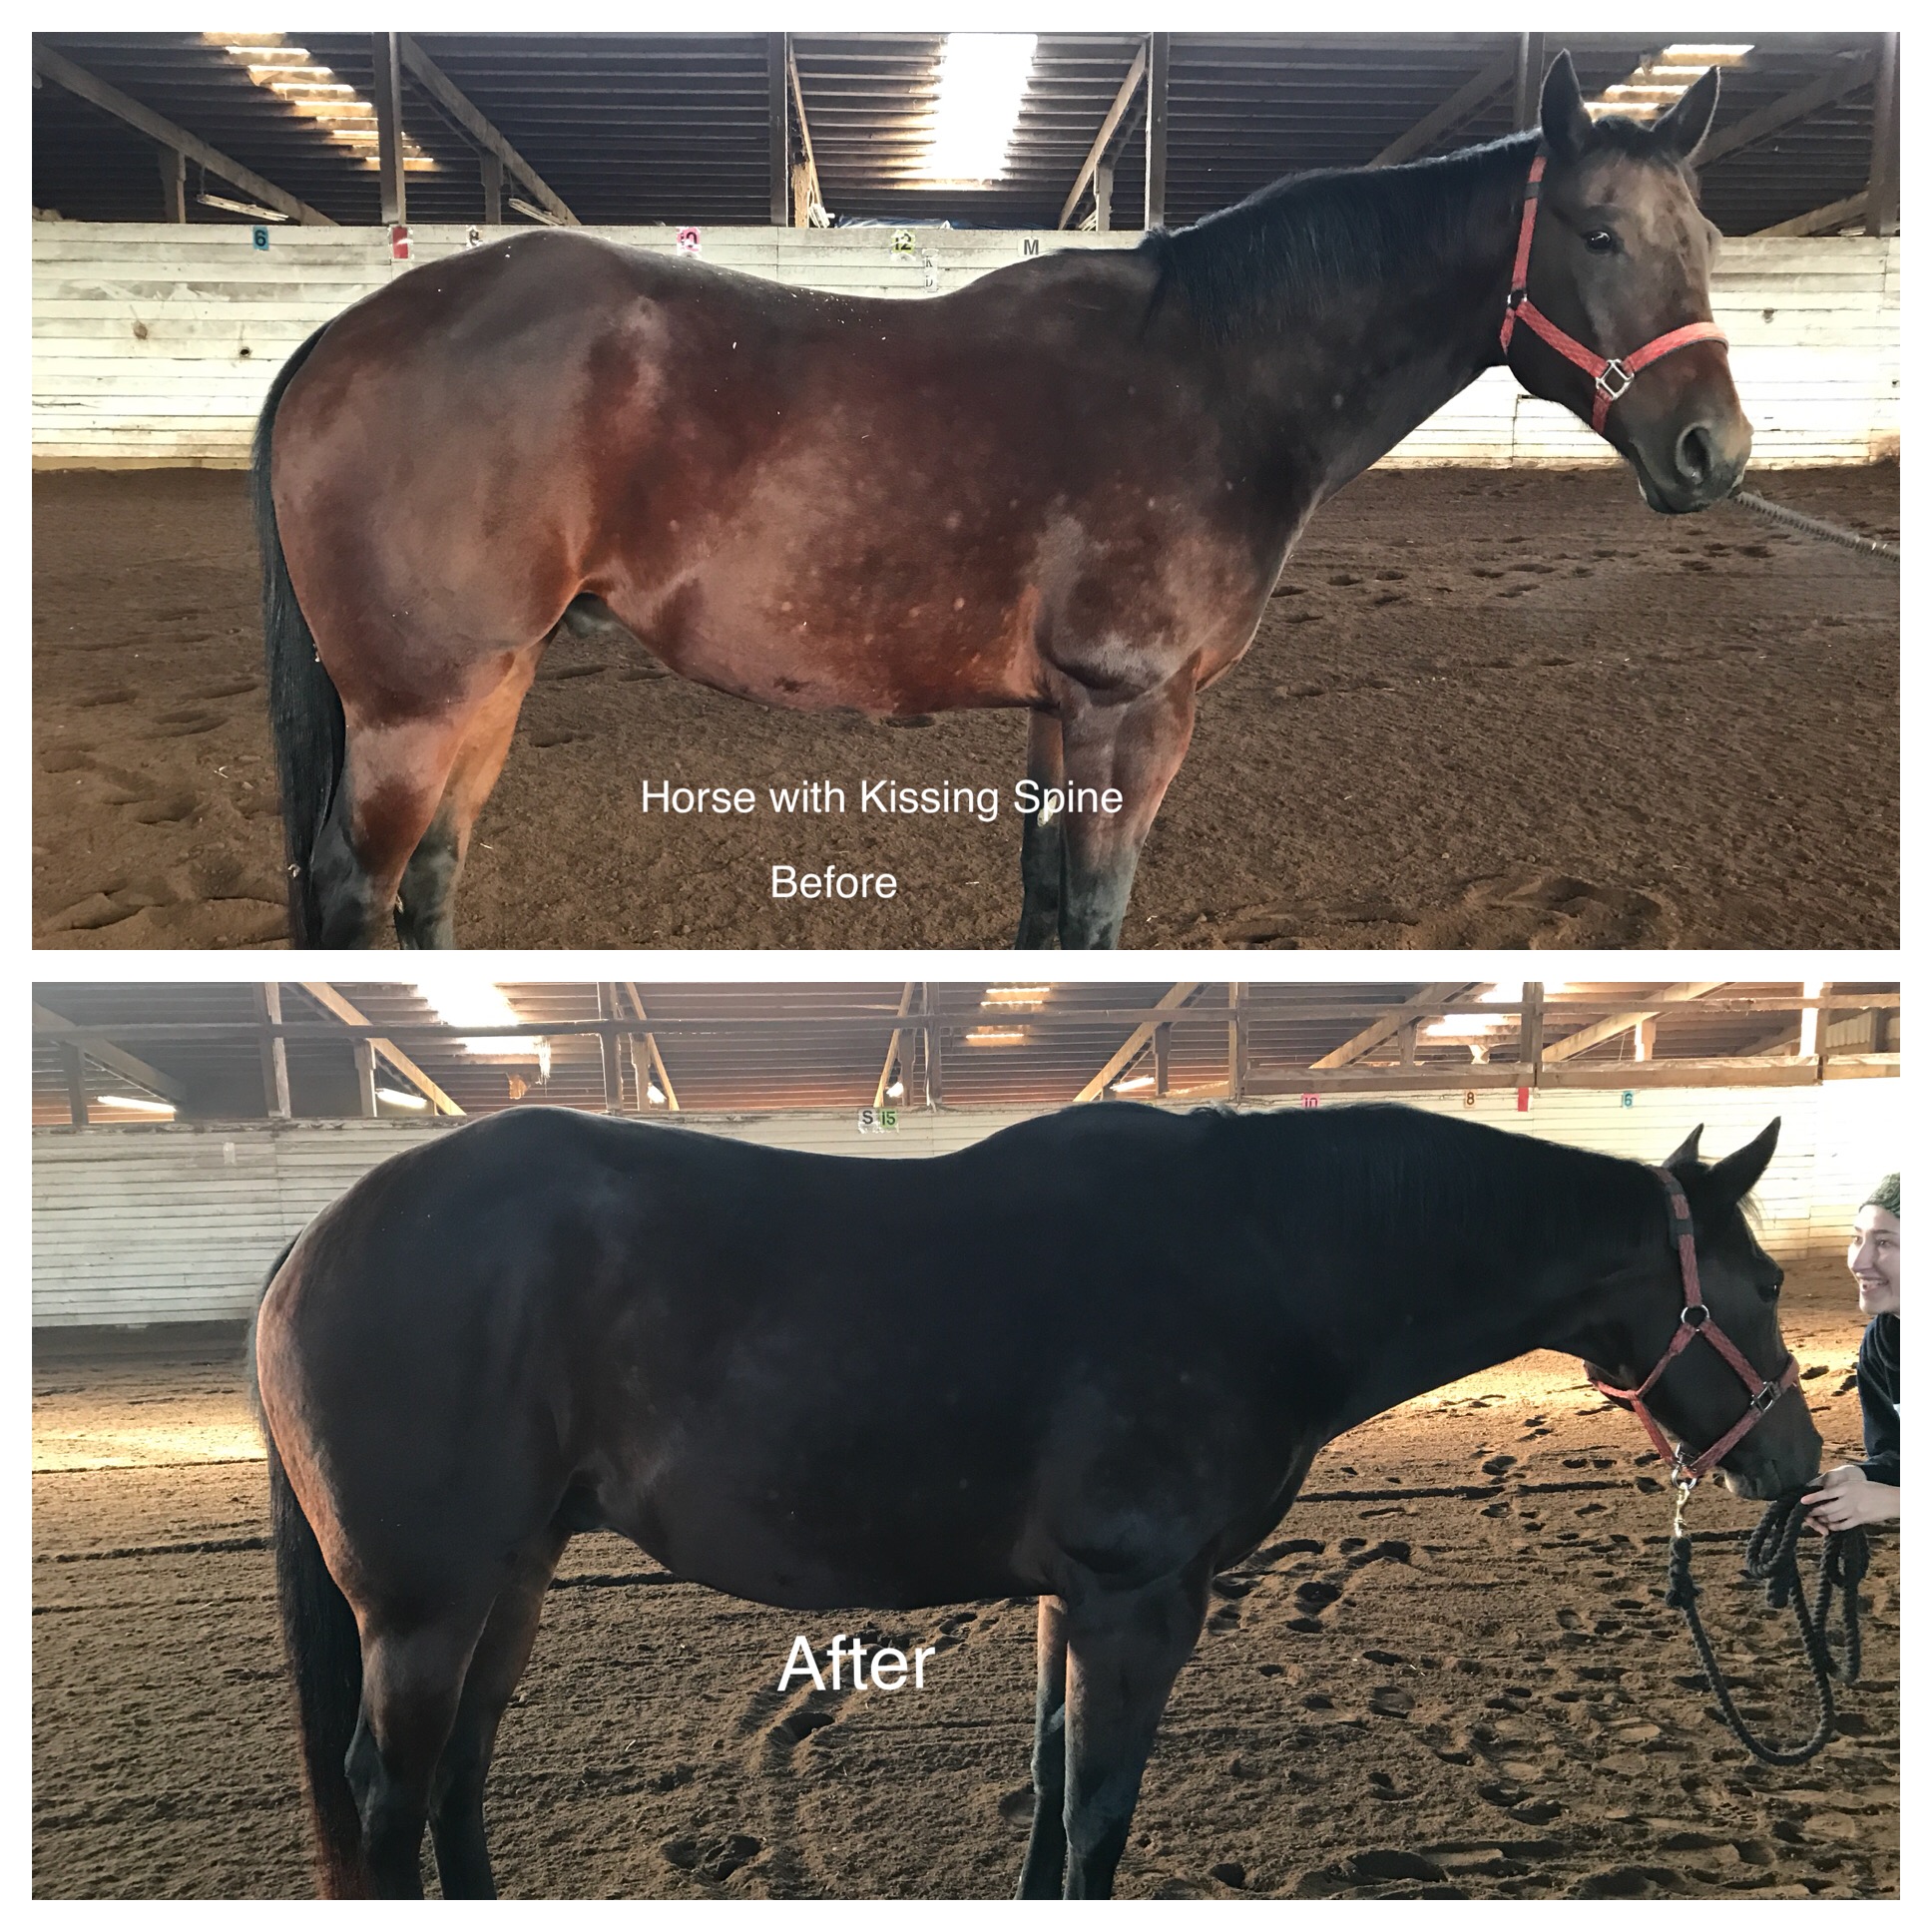 This gelding had been diagnosed with kissing spine.  The goal of our session was to help him relax and feel more comfortable in his body.  In our 20 minute session his topline opened up a bit and he was able relax so much more.